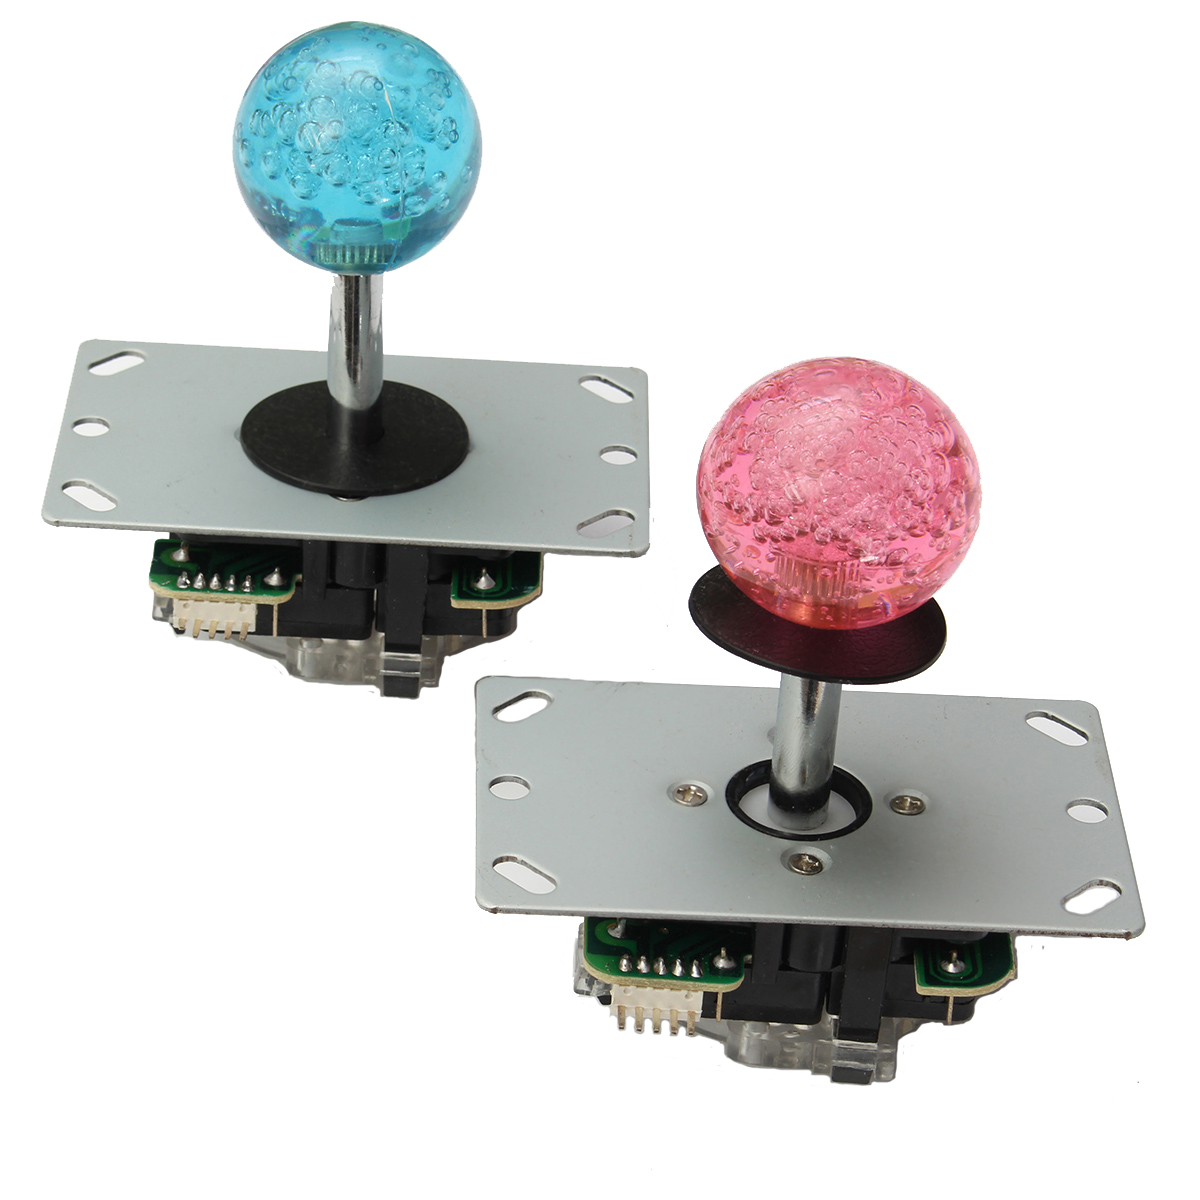 Find 2 Player USB Bundle Kit 2 PC 4/8 Way Joystick Push Button for Arcade MAME Game for Sale on Gipsybee.com with cryptocurrencies